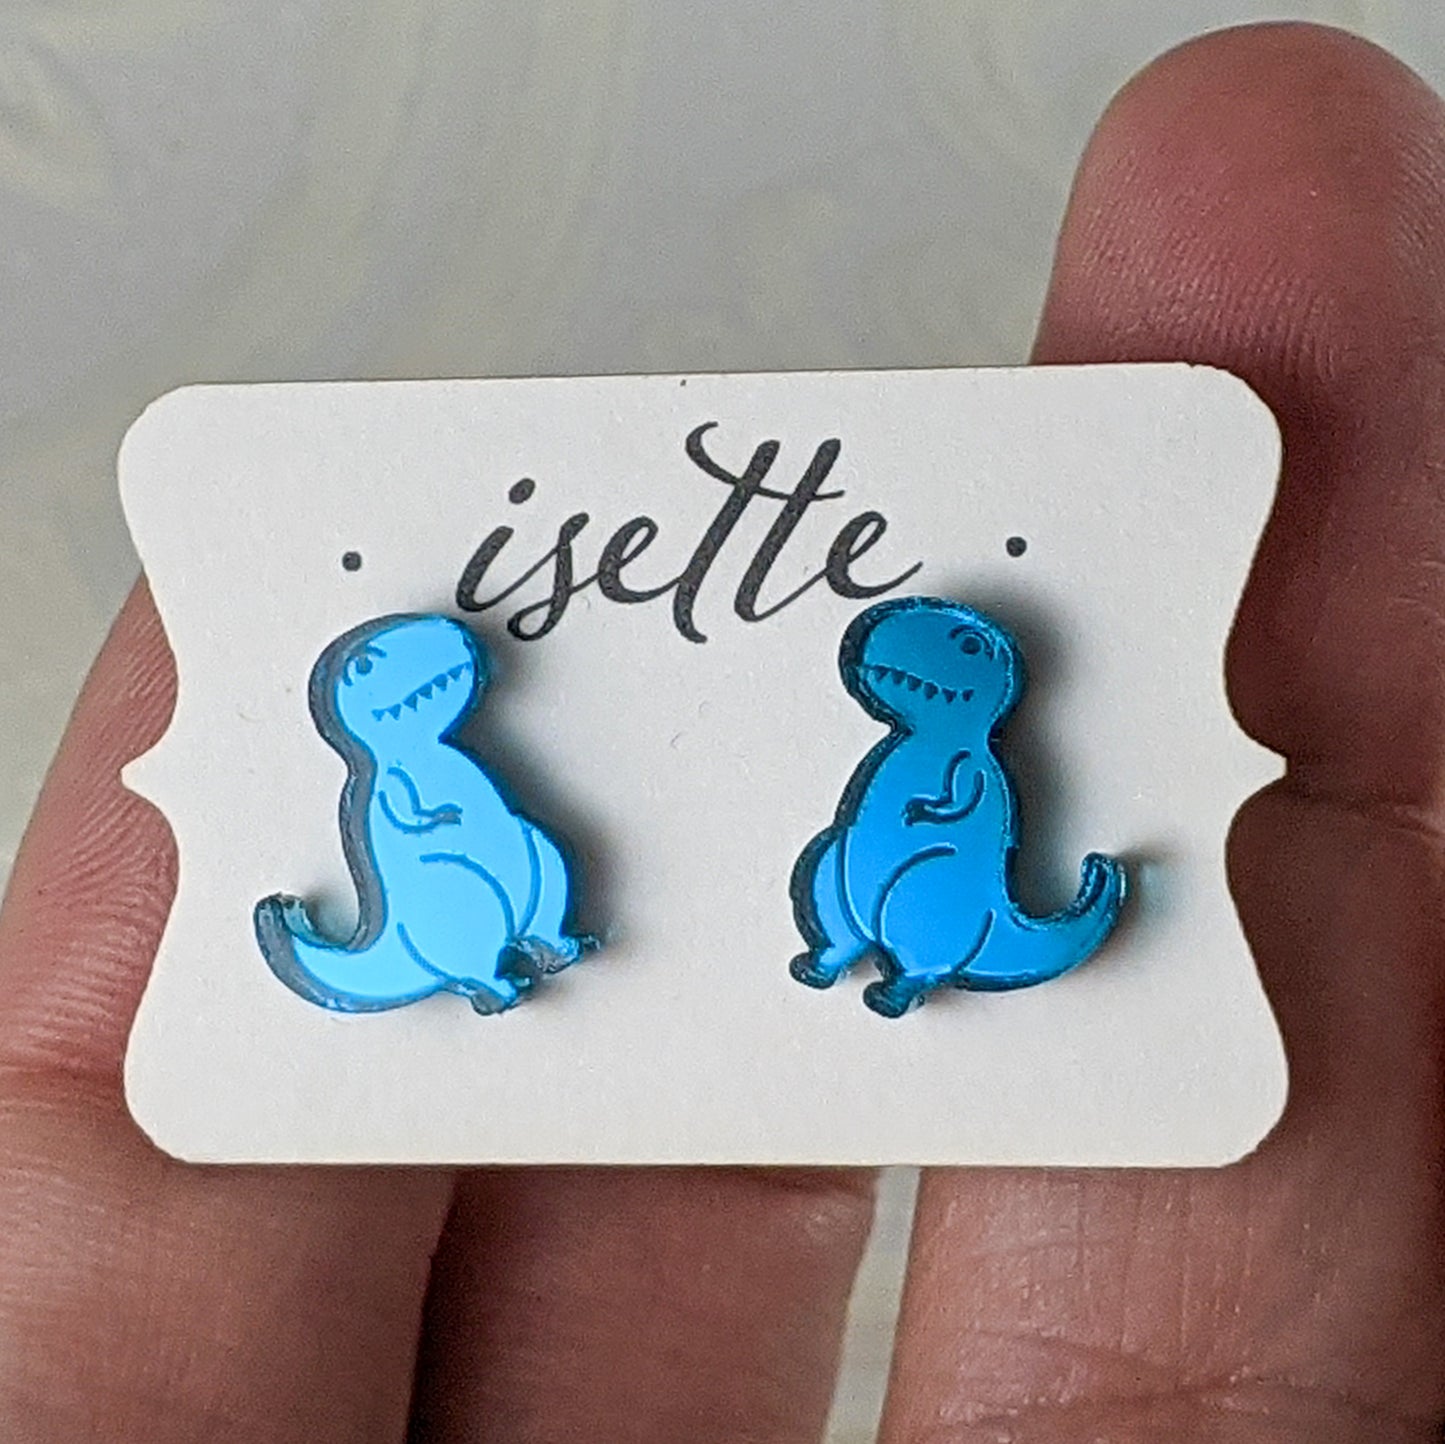 Cartoon Tyrannosaurus Rex stud earrings in teal mirrored acrylic.  The dinosaurs face towards each other and are mounted on an earring card.  By Isette.